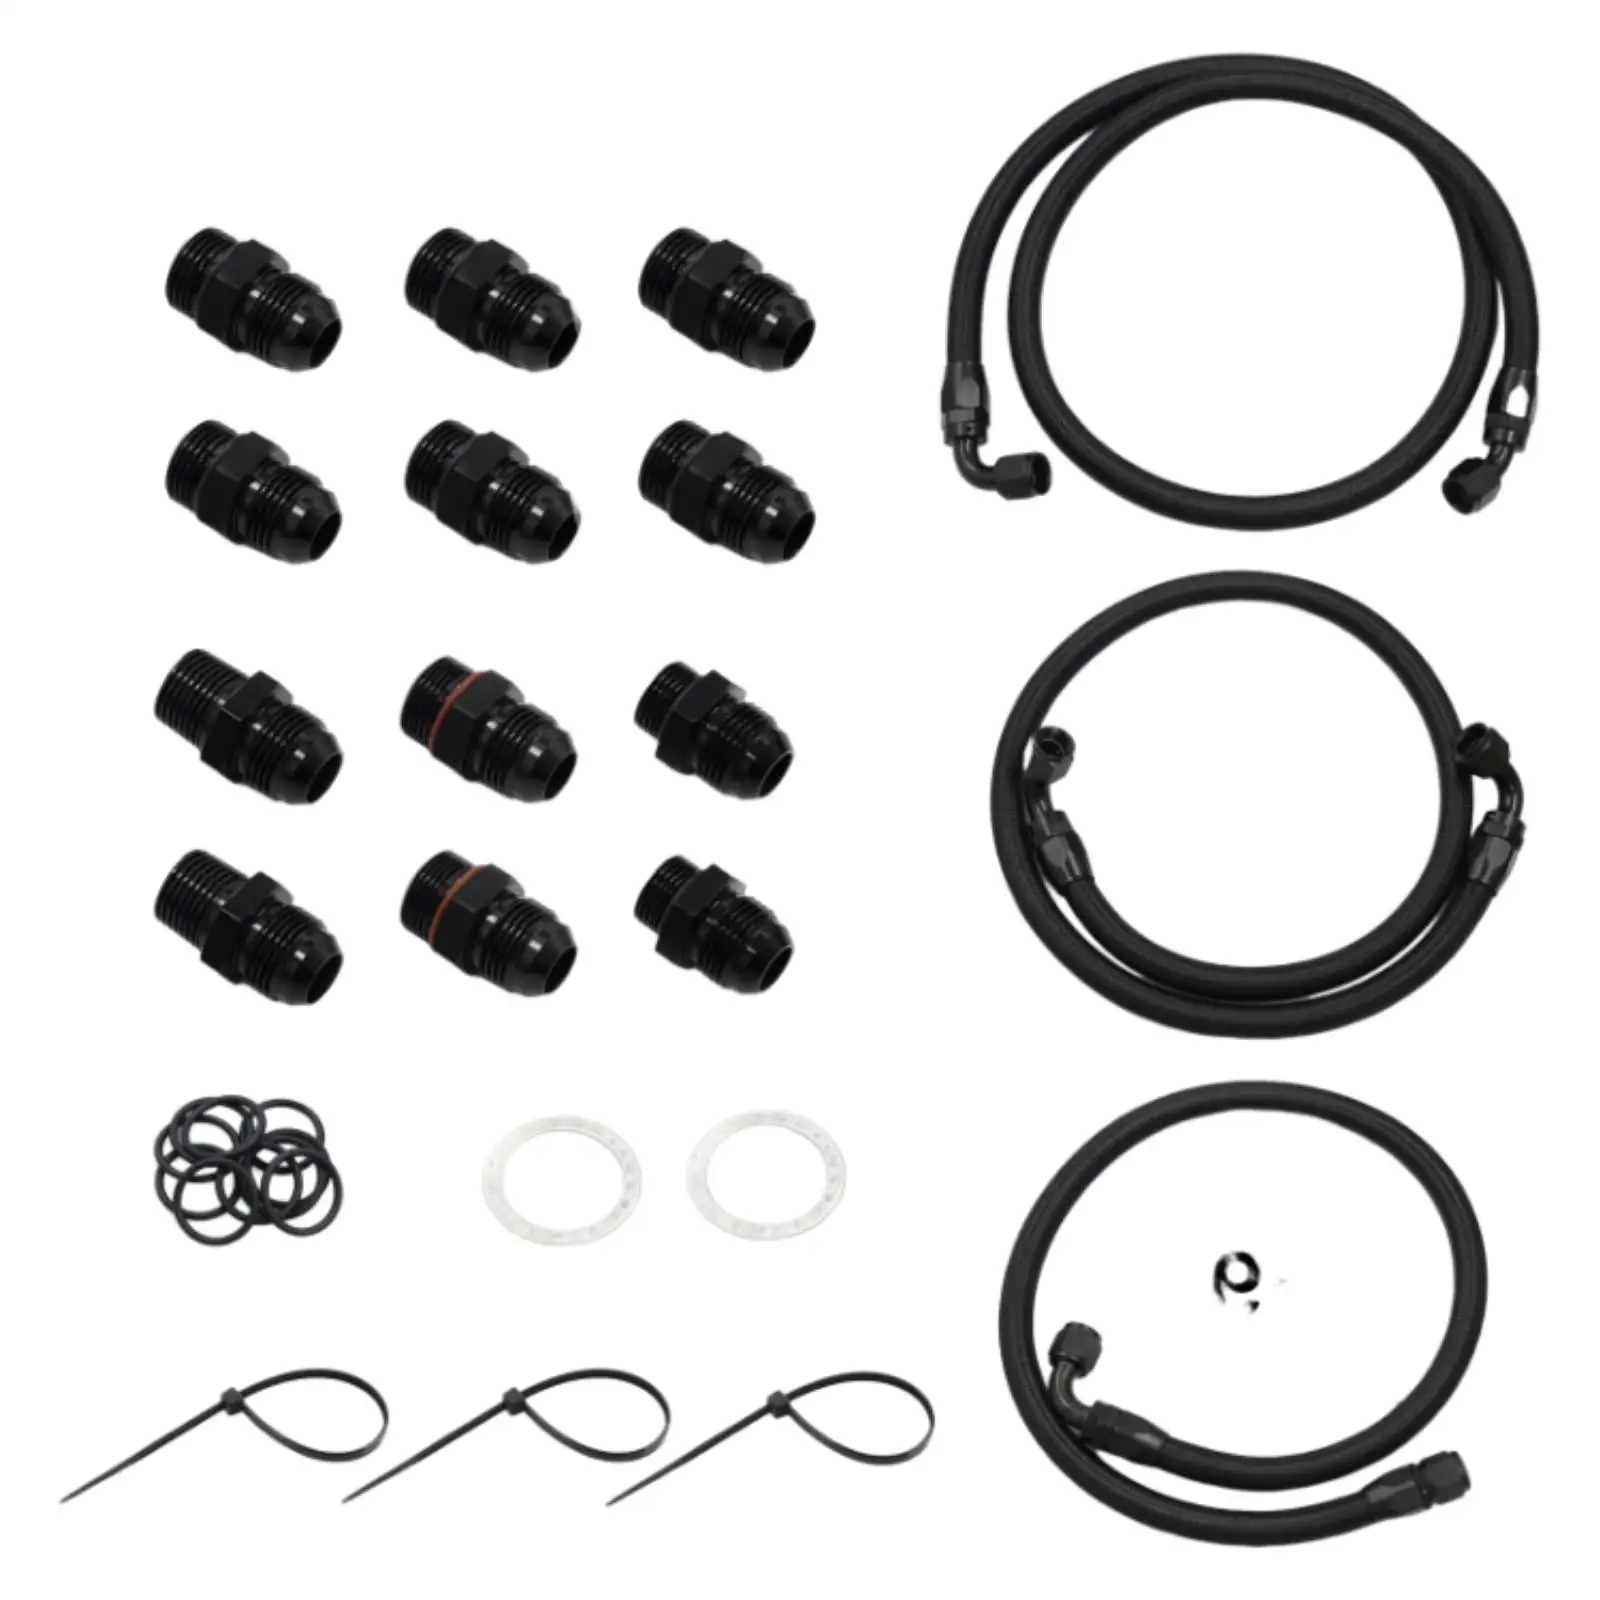 Transmission Cooler Lines Kit Heavy Duty High Performance Durable Metal for GM